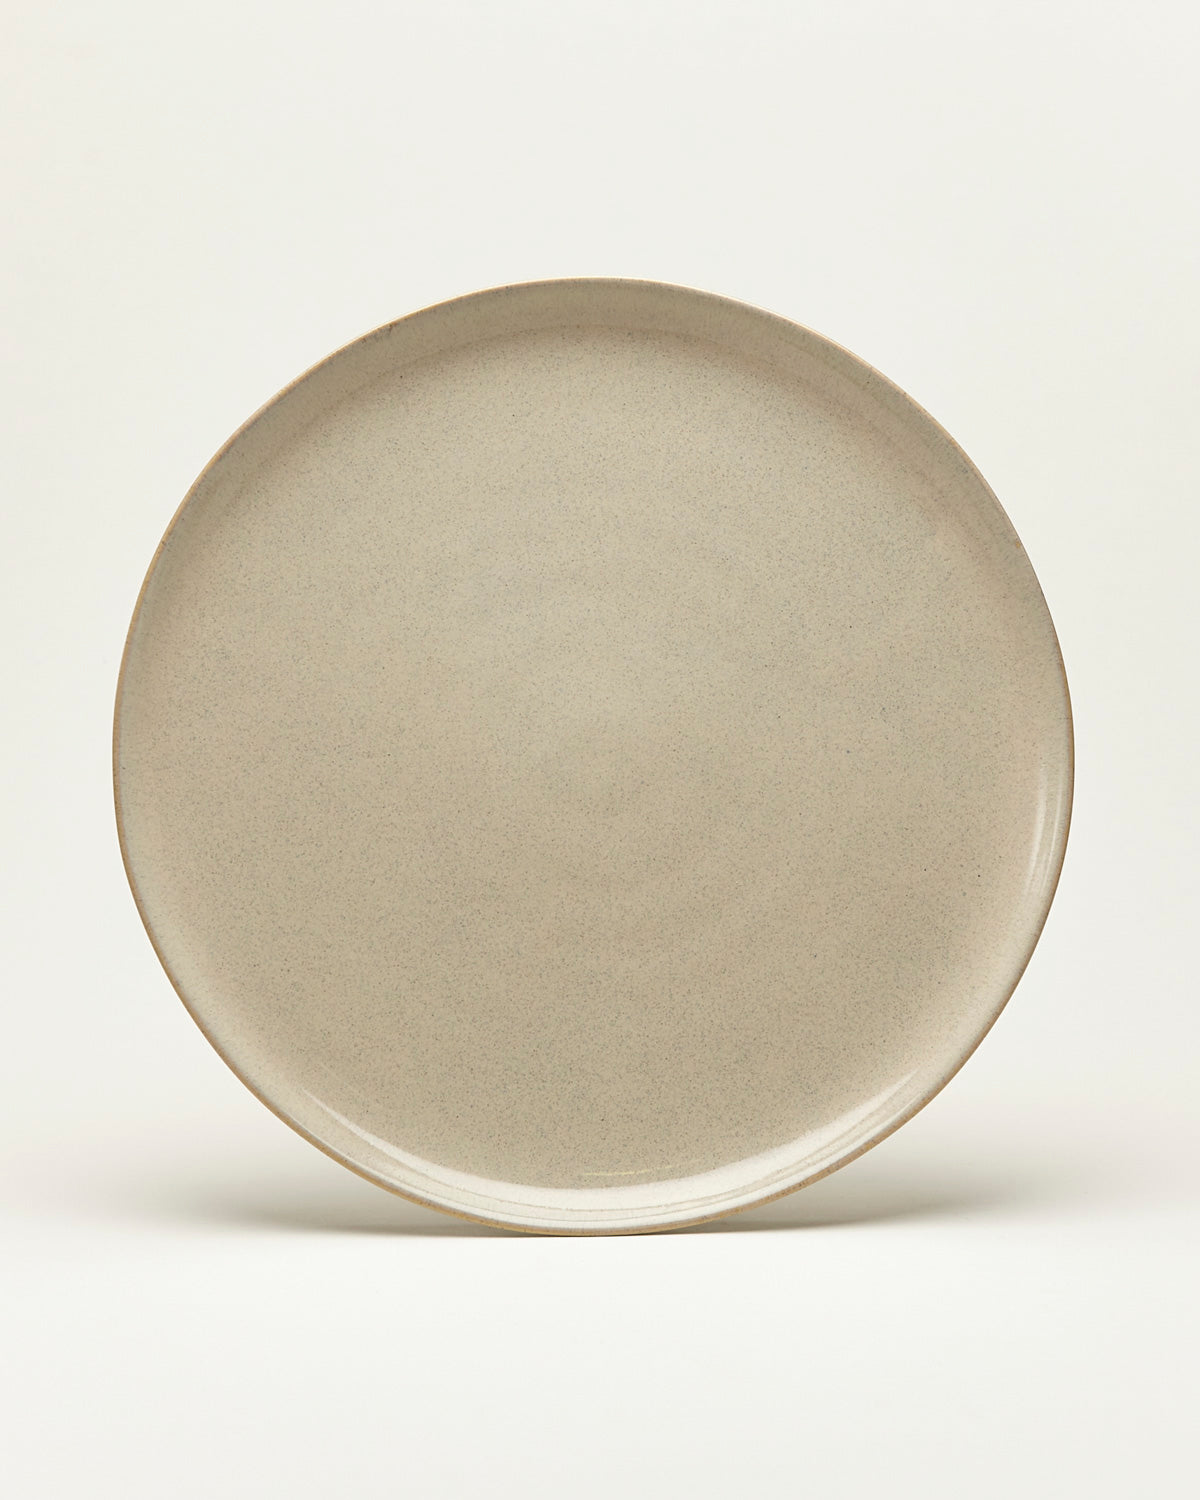 Big Plate (L) Limited - Traditional